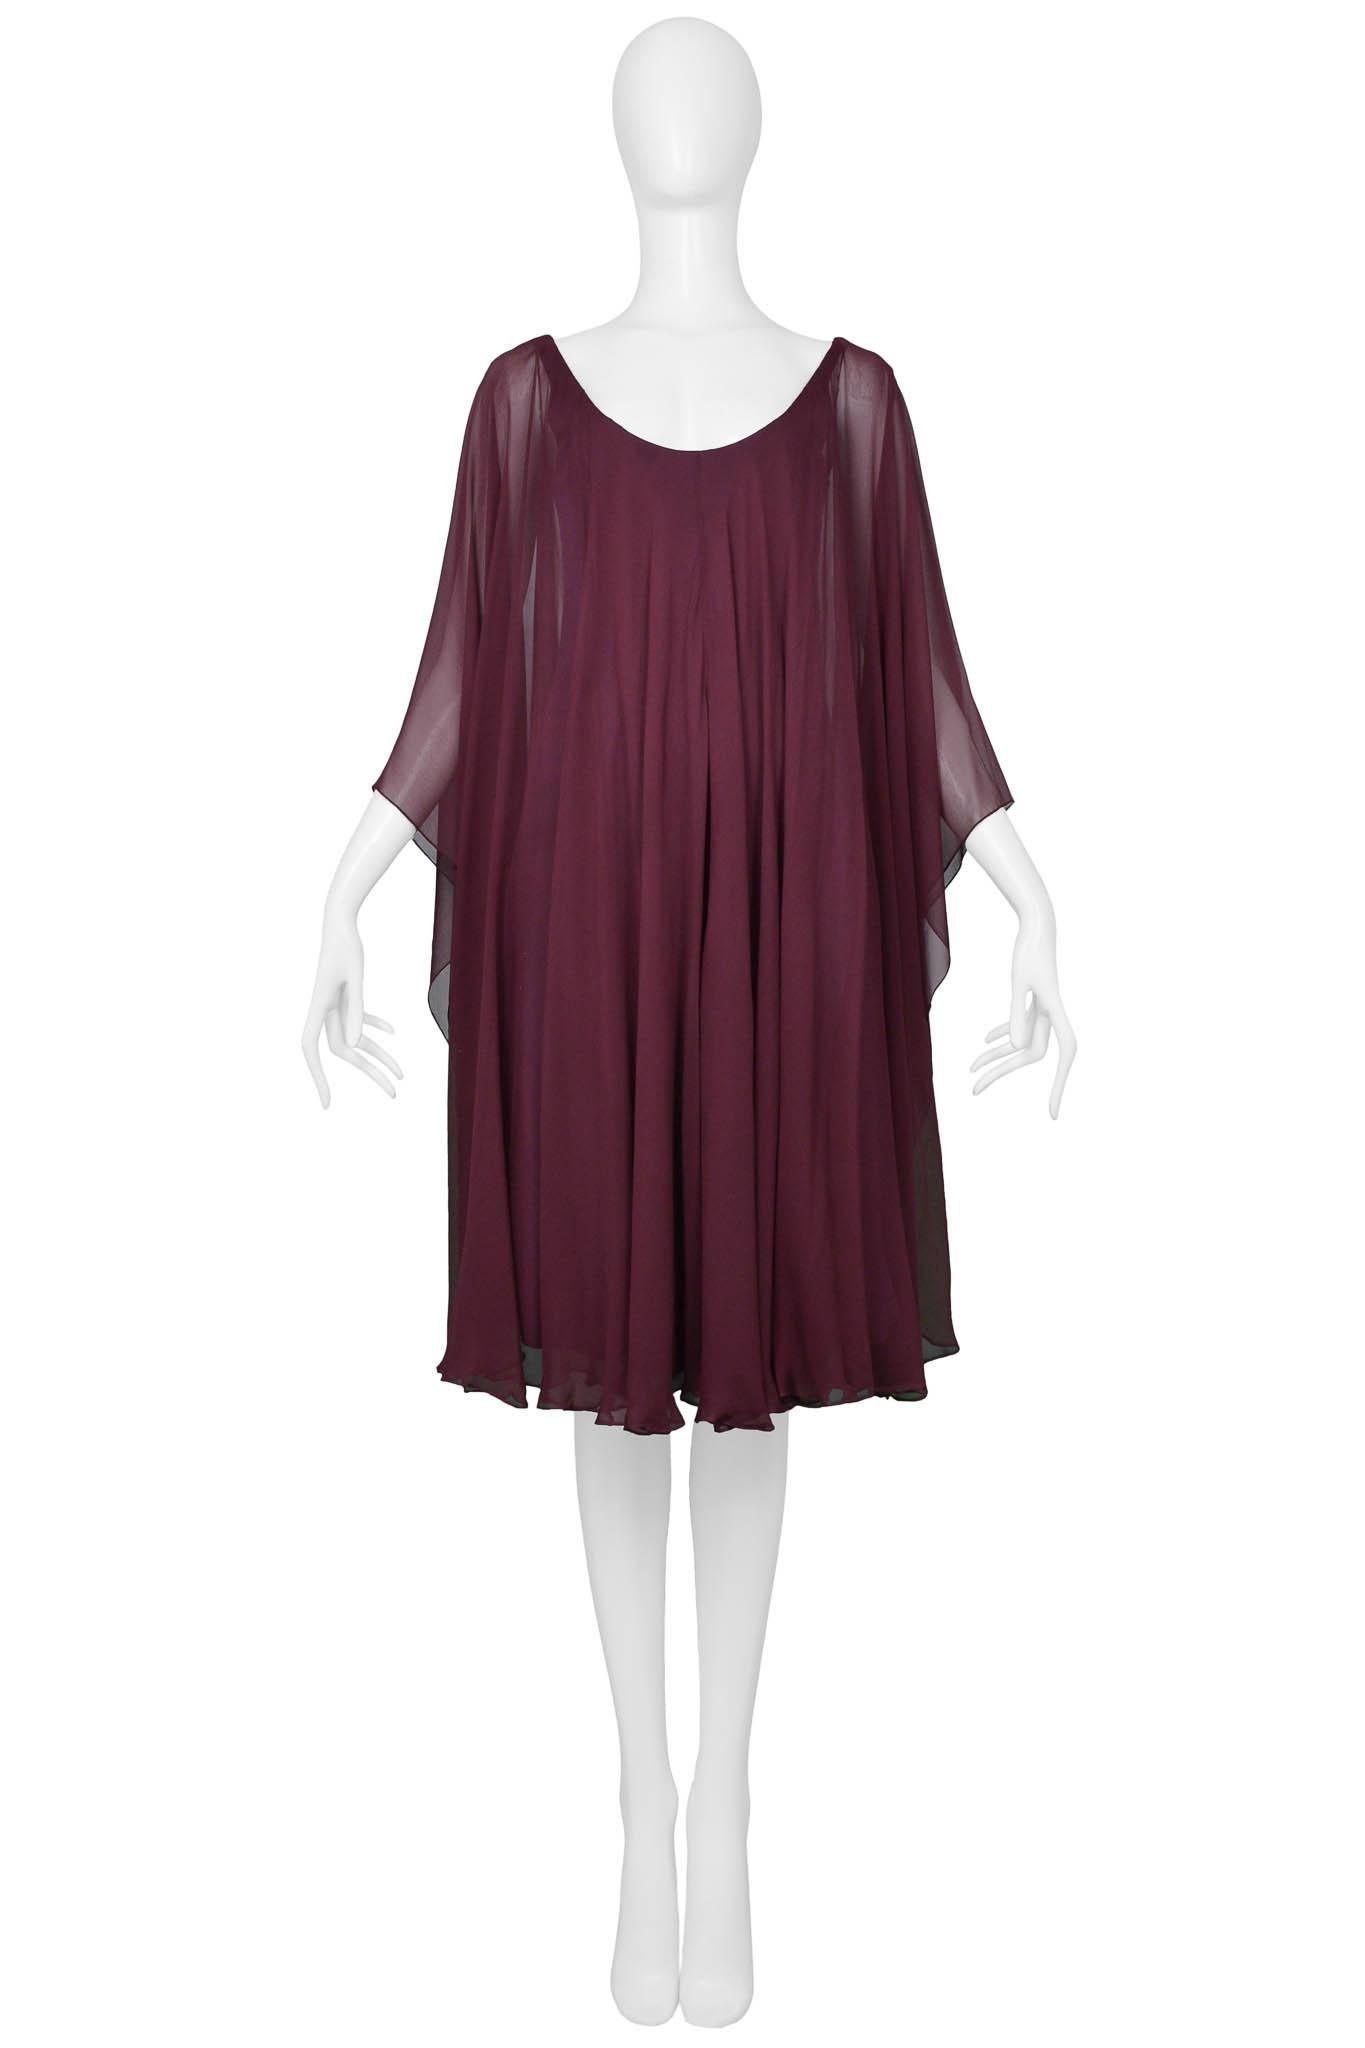 Resurrection Vintage is pleased to offer a vintage Halston dress featuring a flowy chiffon overlay, knee-length hem, fitted underlay, and scooped neckline. 

Halston
Size Small
Polyester, Chiffon
Excellent Vintage Condition
Authenticity Guaranteed 